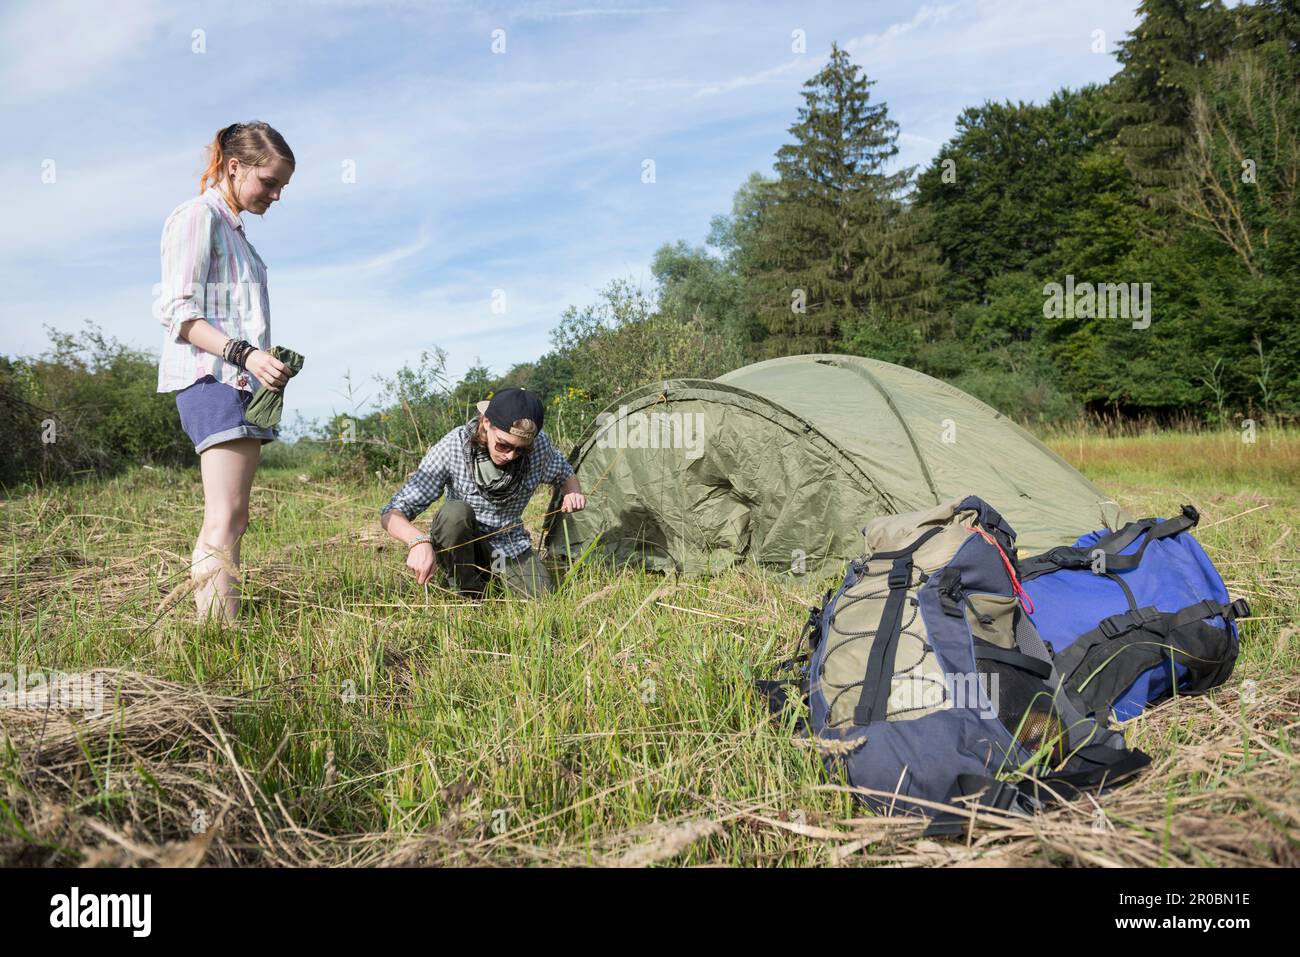 Young couple setting up tent in a forest, Bavaria, Germany Stock Photo